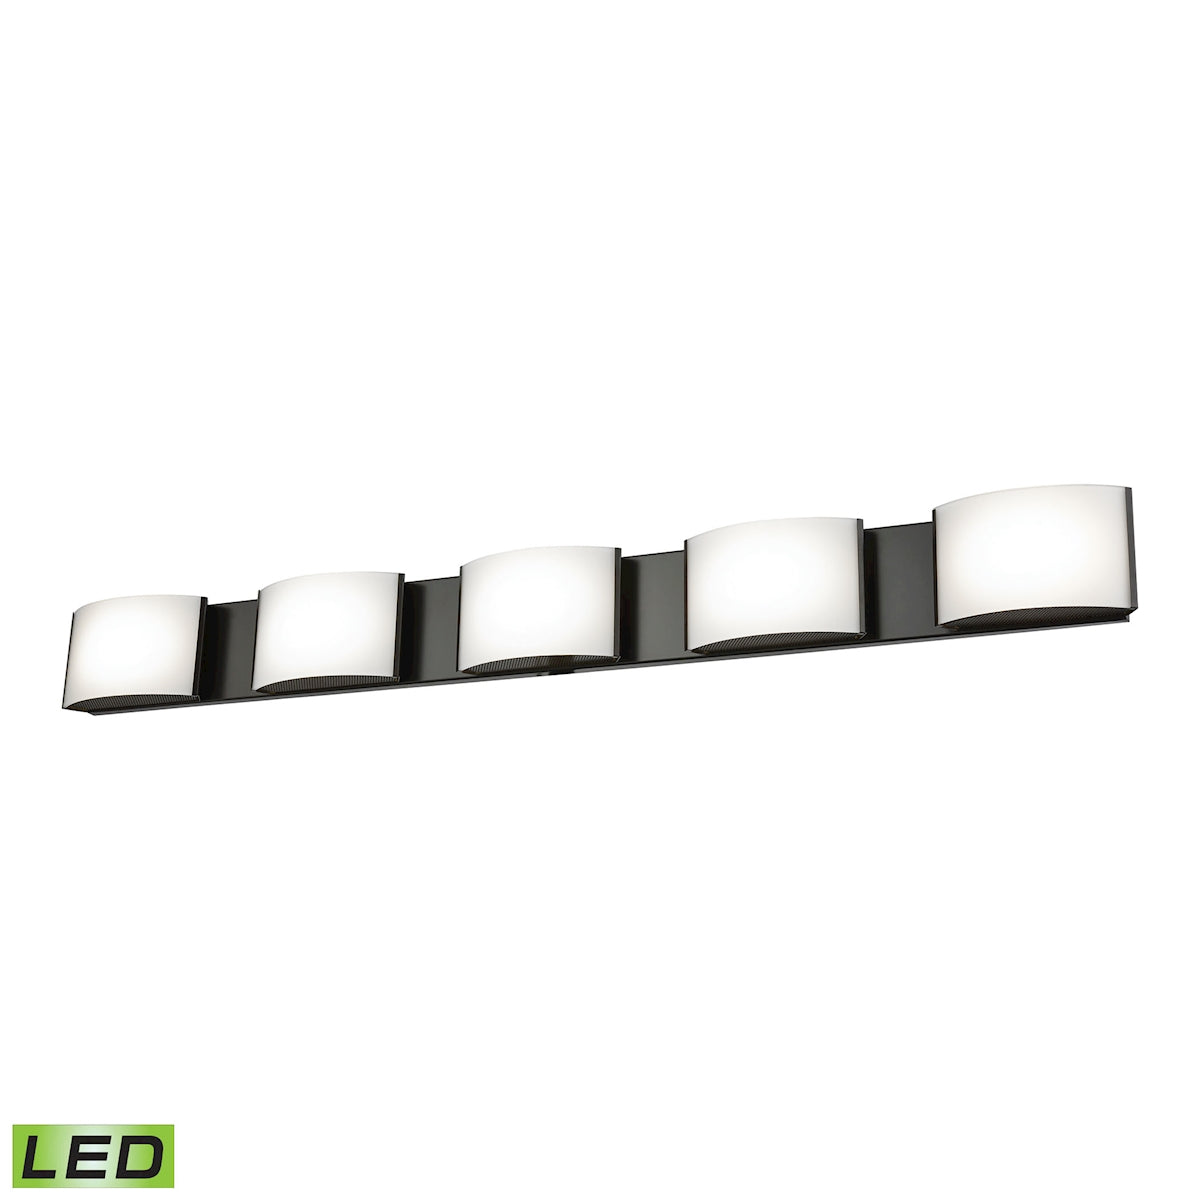 ELK Lighting BVL915-10-45 Pandora 5-Light Vanity Sconce in Oiled Bronze with Opal Glass - Integrated LED